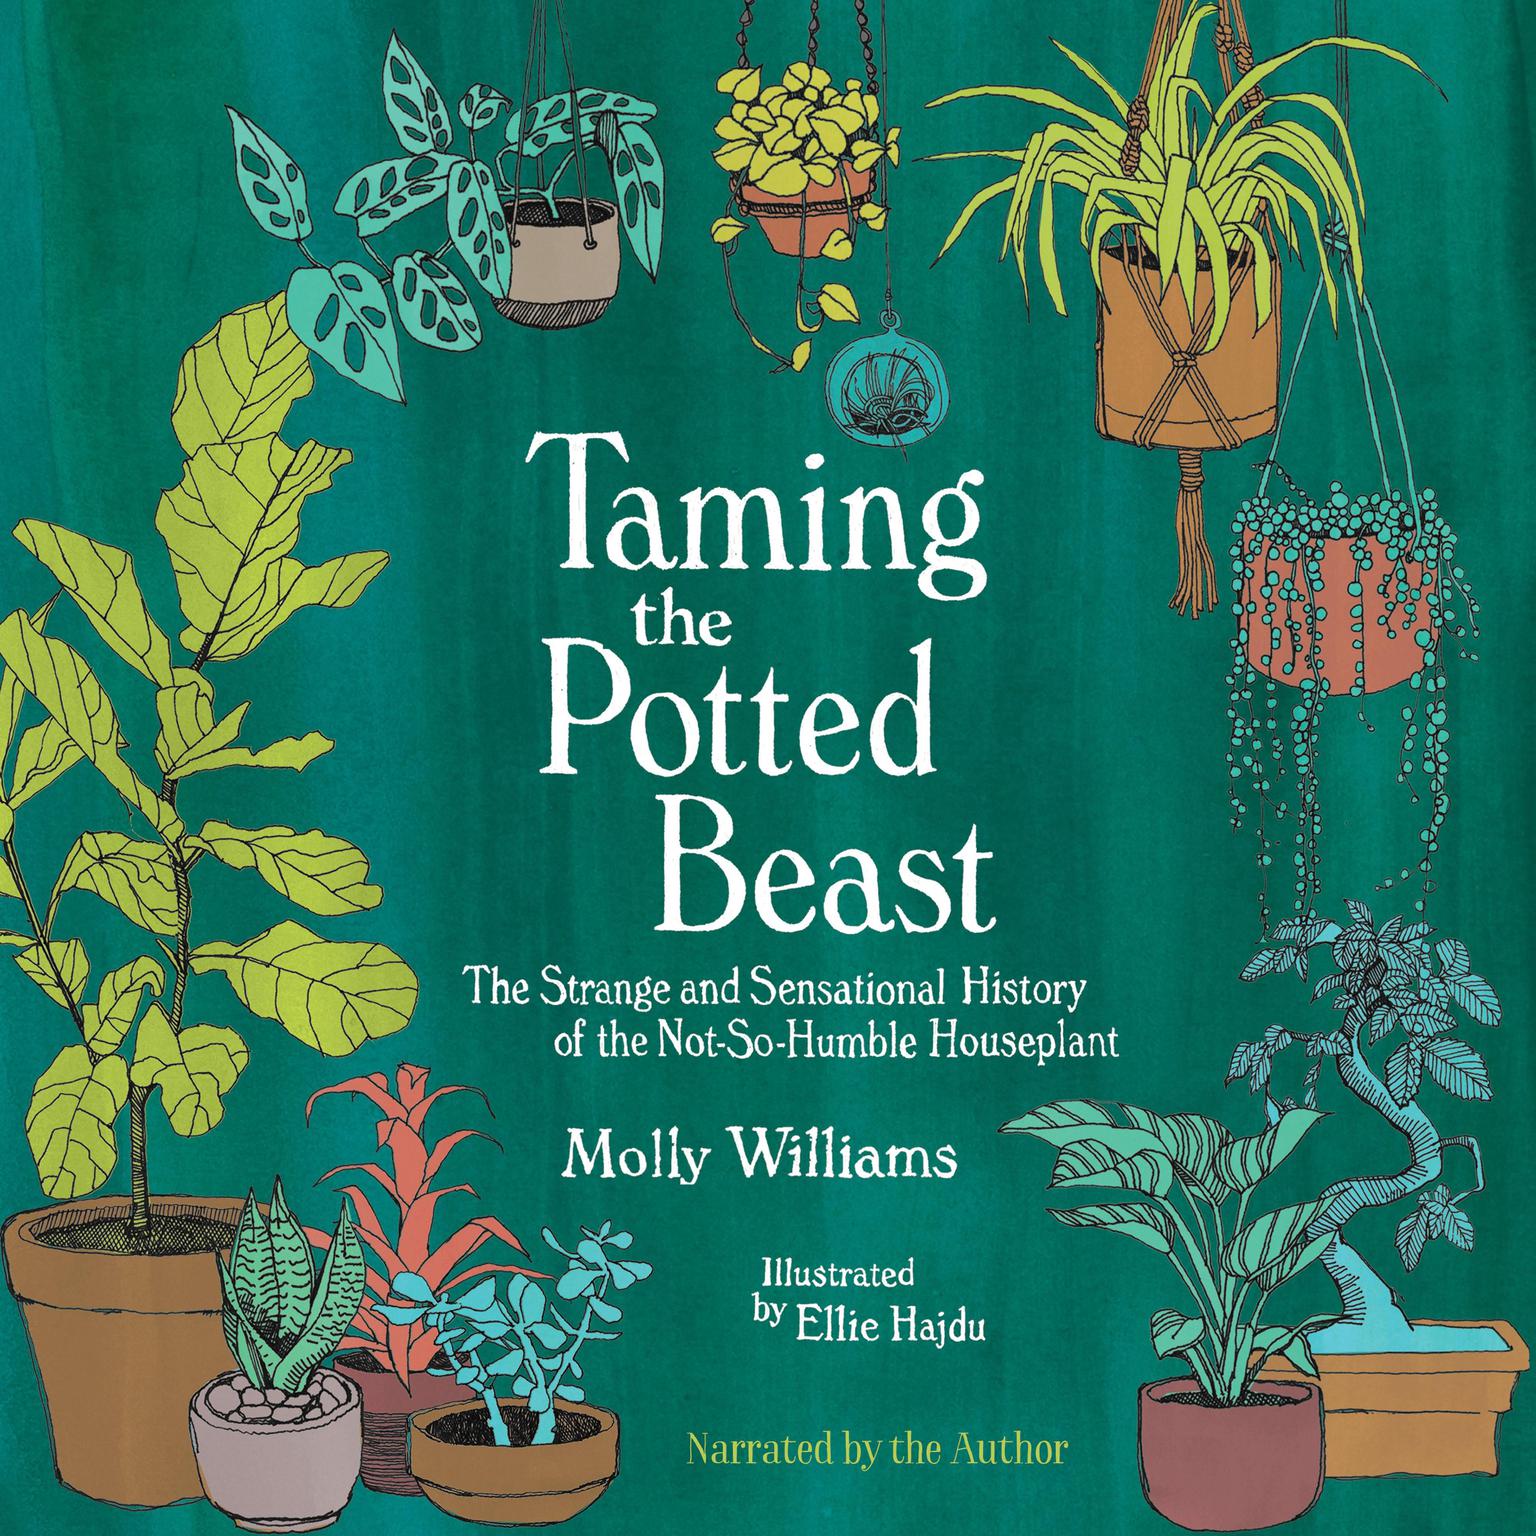 Taming the Potted Beast: The Strange and Sensational History of the Not-So-Humble Houseplant Audiobook, by Molly Williams